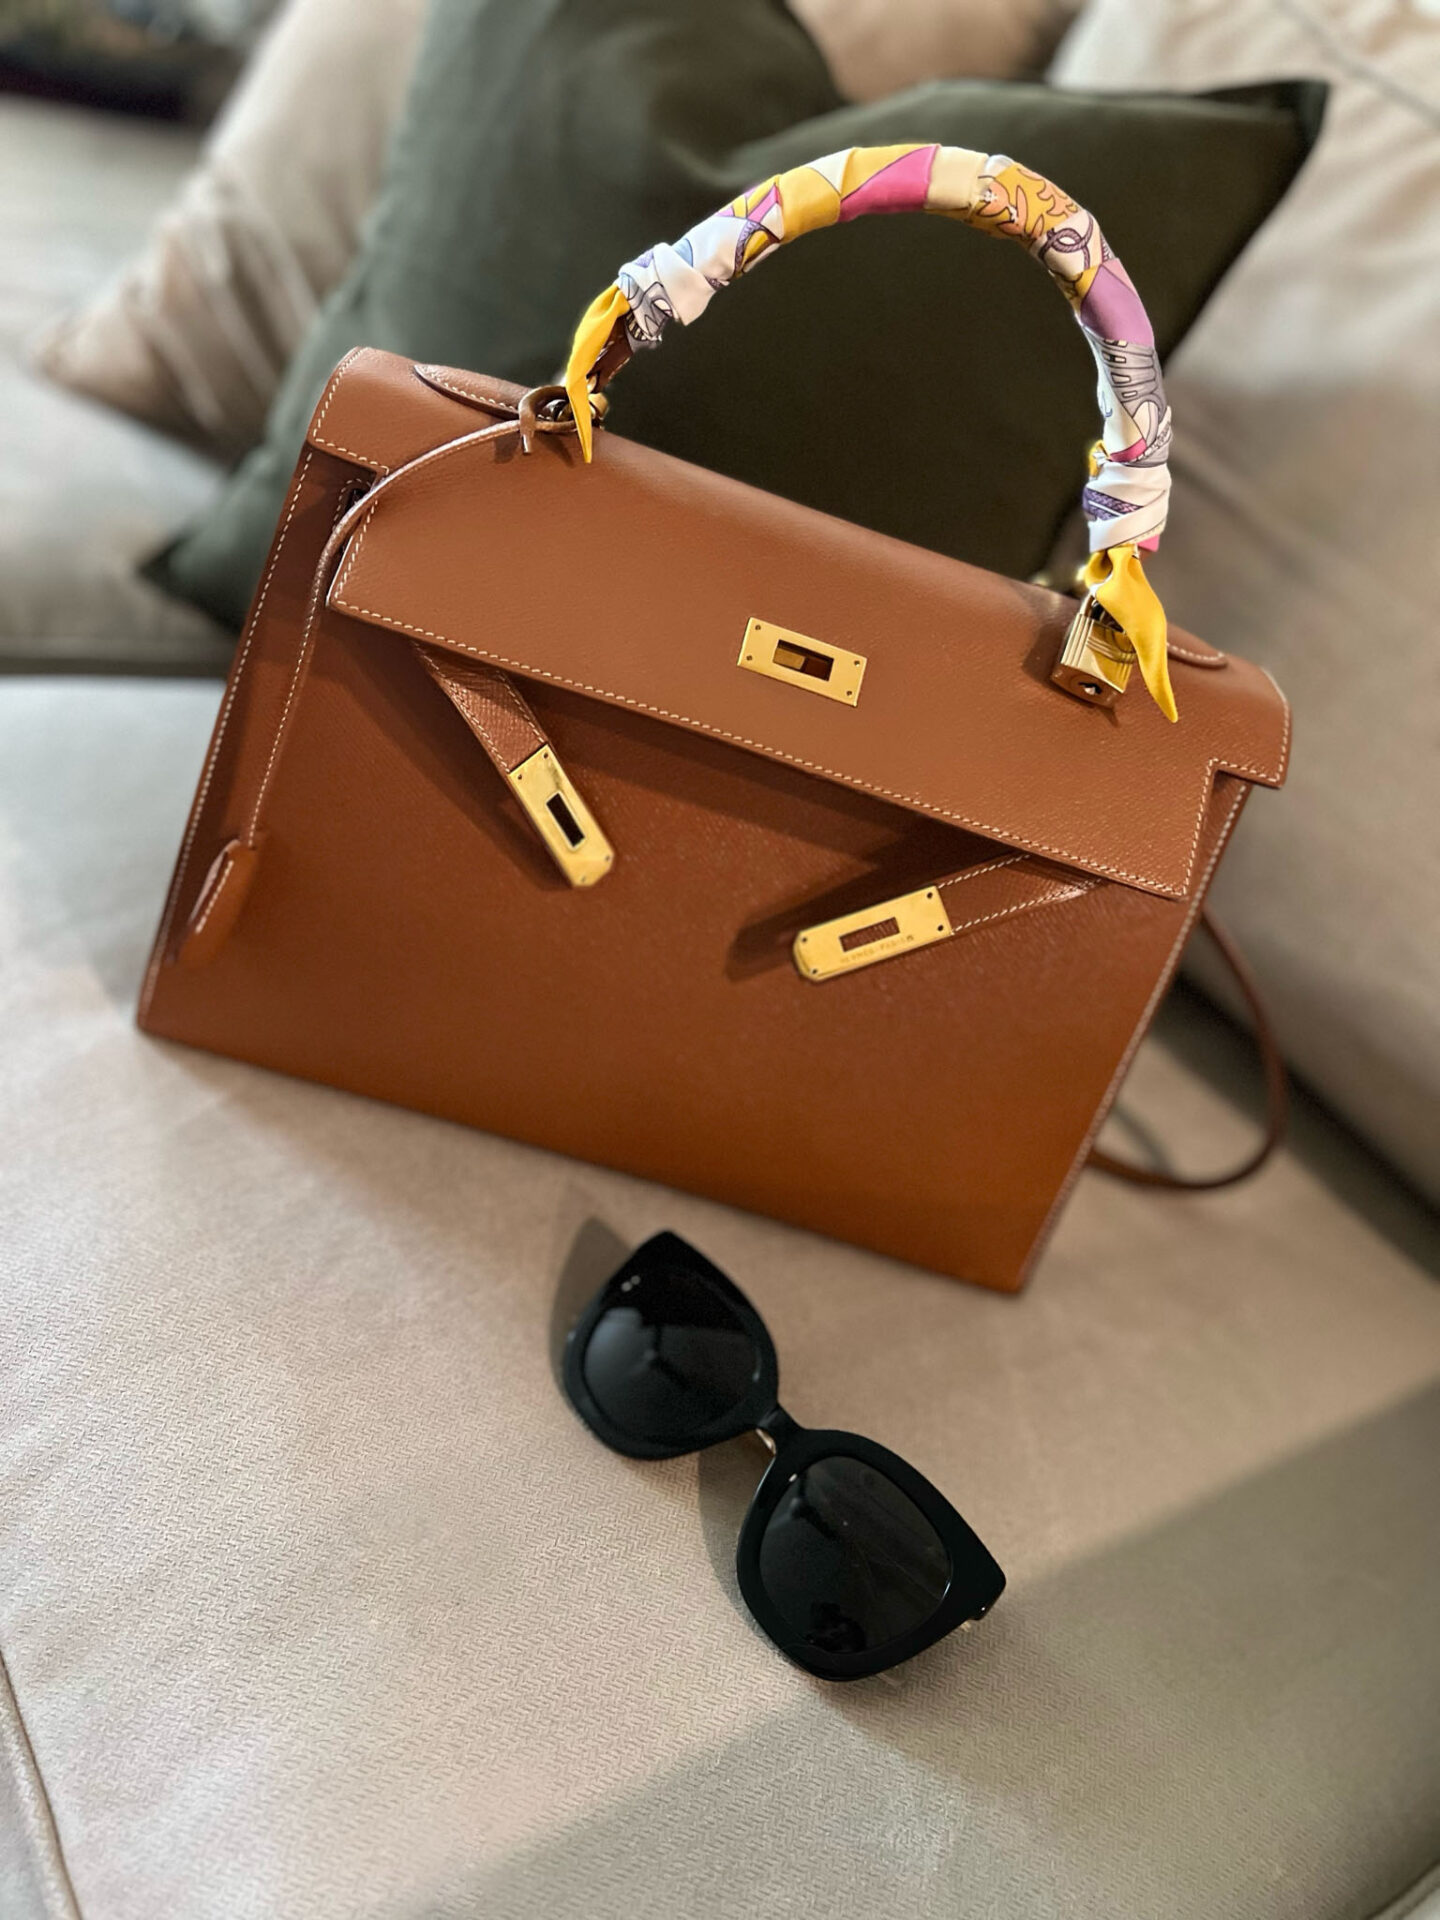 Dallas fashion blogger shares 4 questions to ask yourself before purchasing a designer handbag_Hermes Kelly